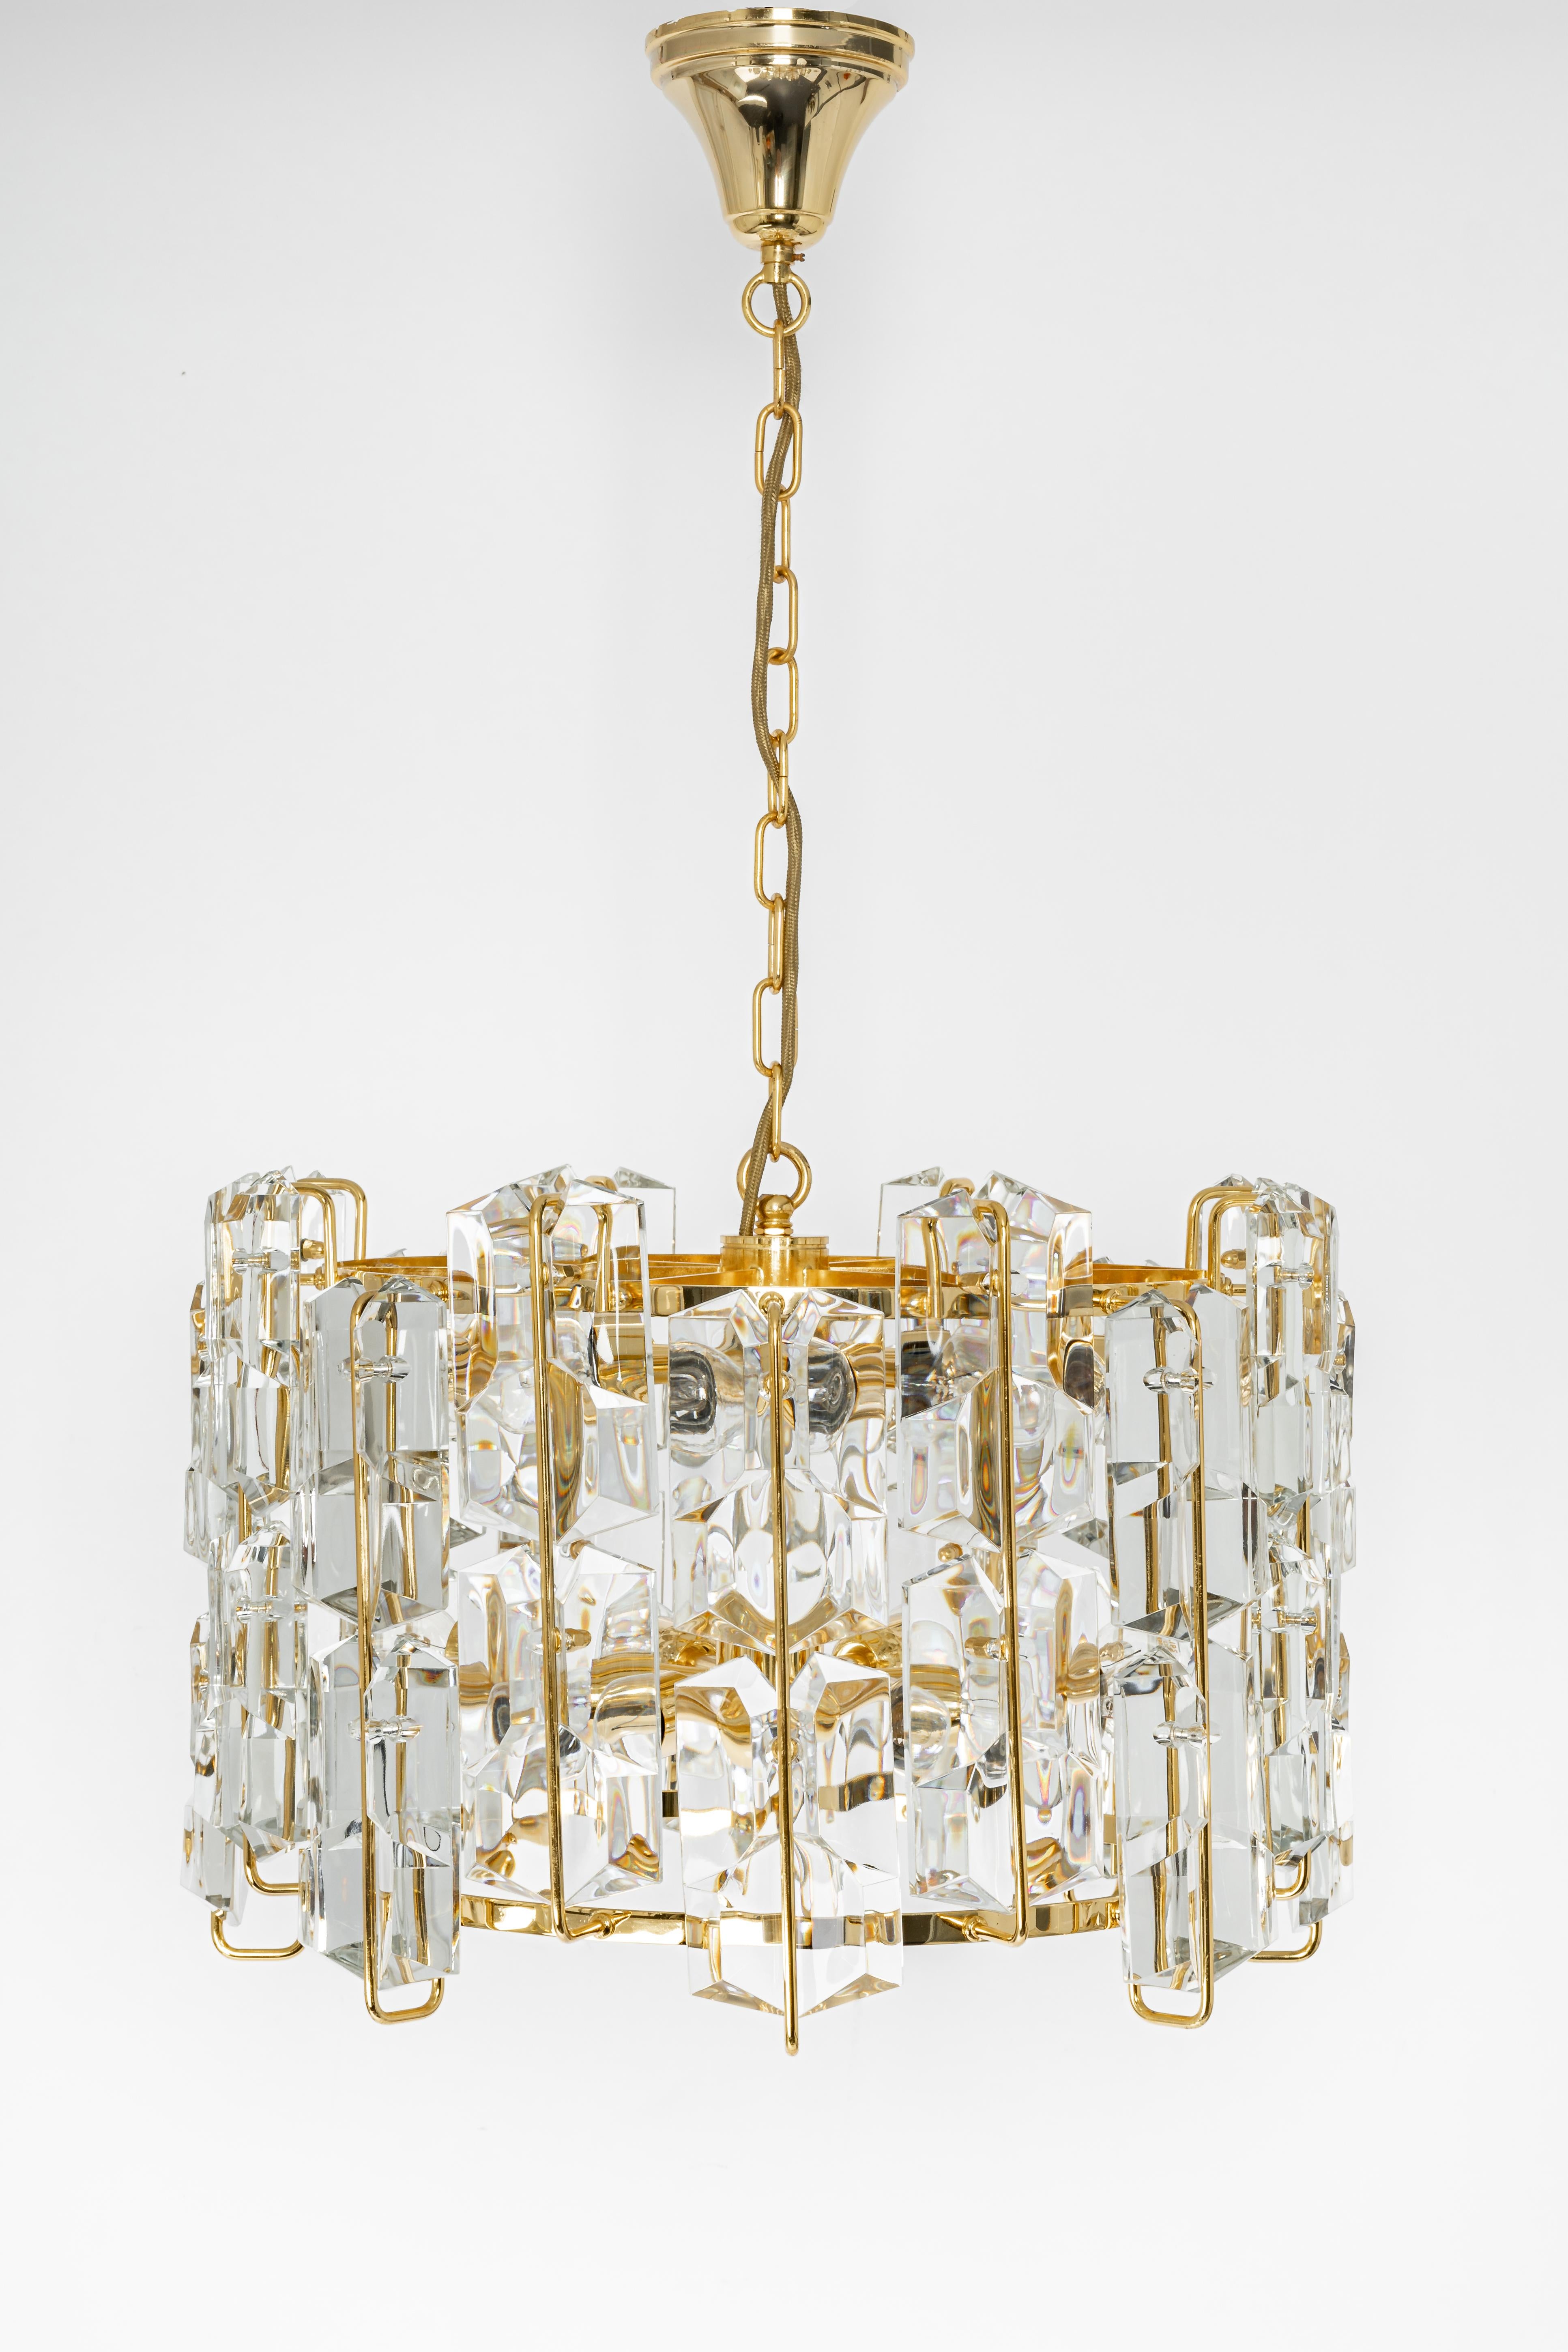 Large stunning chandelier with many crystal glass over a gilt brass frame, made by Ernst Palme in Germany, 1970s.
High quality and in very good condition. Cleaned, well-wired and ready to use. 

The chandelier requires 16 x E14 bulbs ( up to 40 W